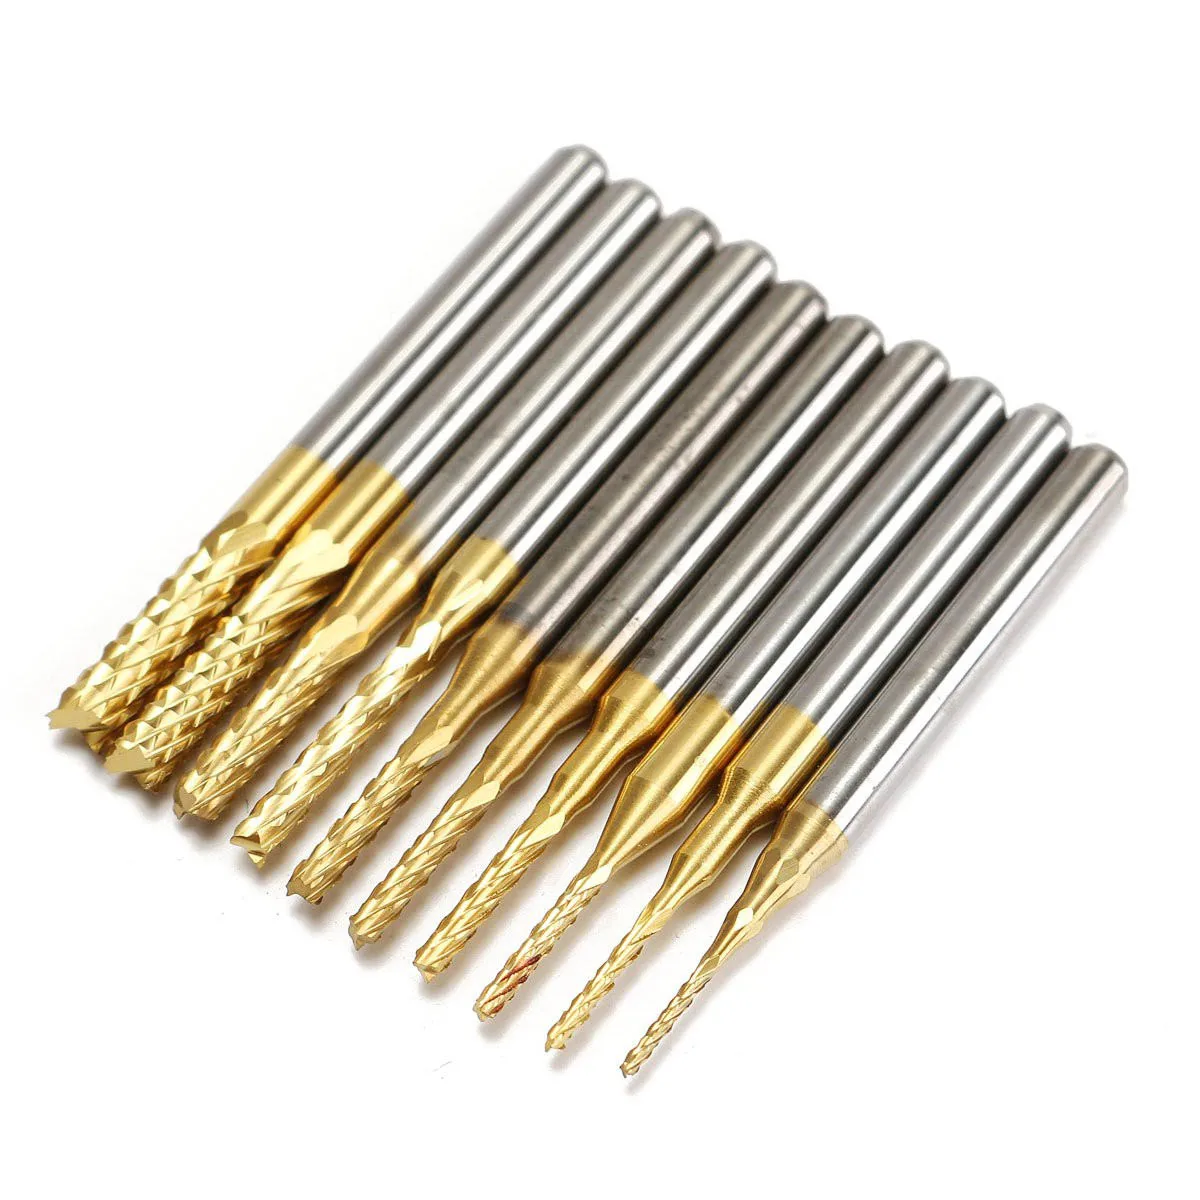 10Pcs/Box Cemented Carbide Drillpro 1/8" 0.8-3.175mm CNC PCB Drill Bit Engraving Mill Cutter Durable Quality